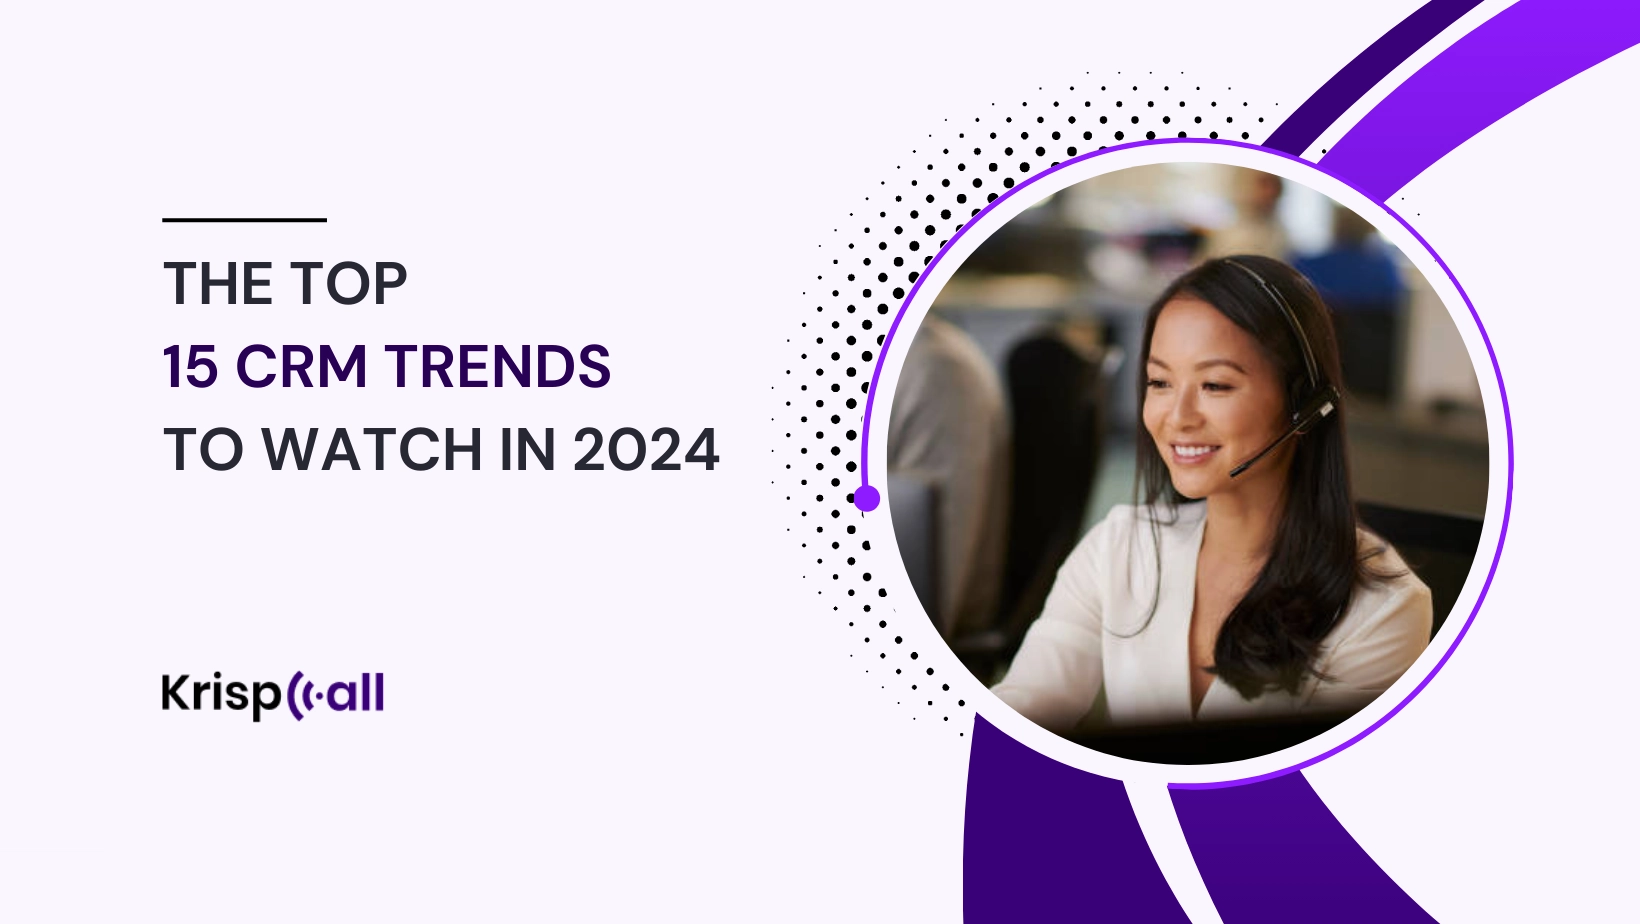 The Top 15 CRM Trends to Watch in 2024